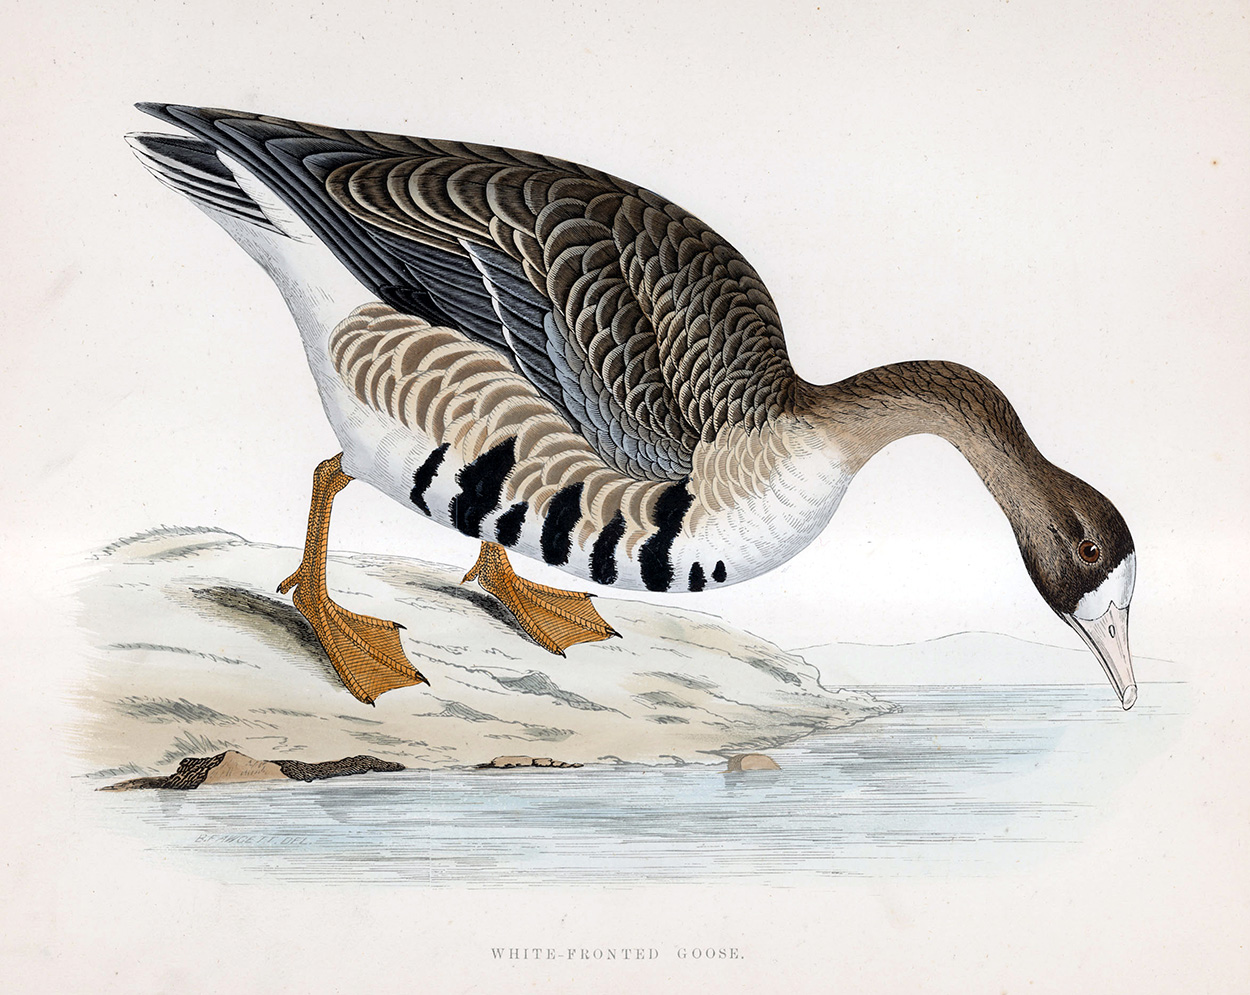 White Fronted Goose - hand coloured lithograph 1891 (Print) art by Beverley R Morris at The Illustration Art Gallery